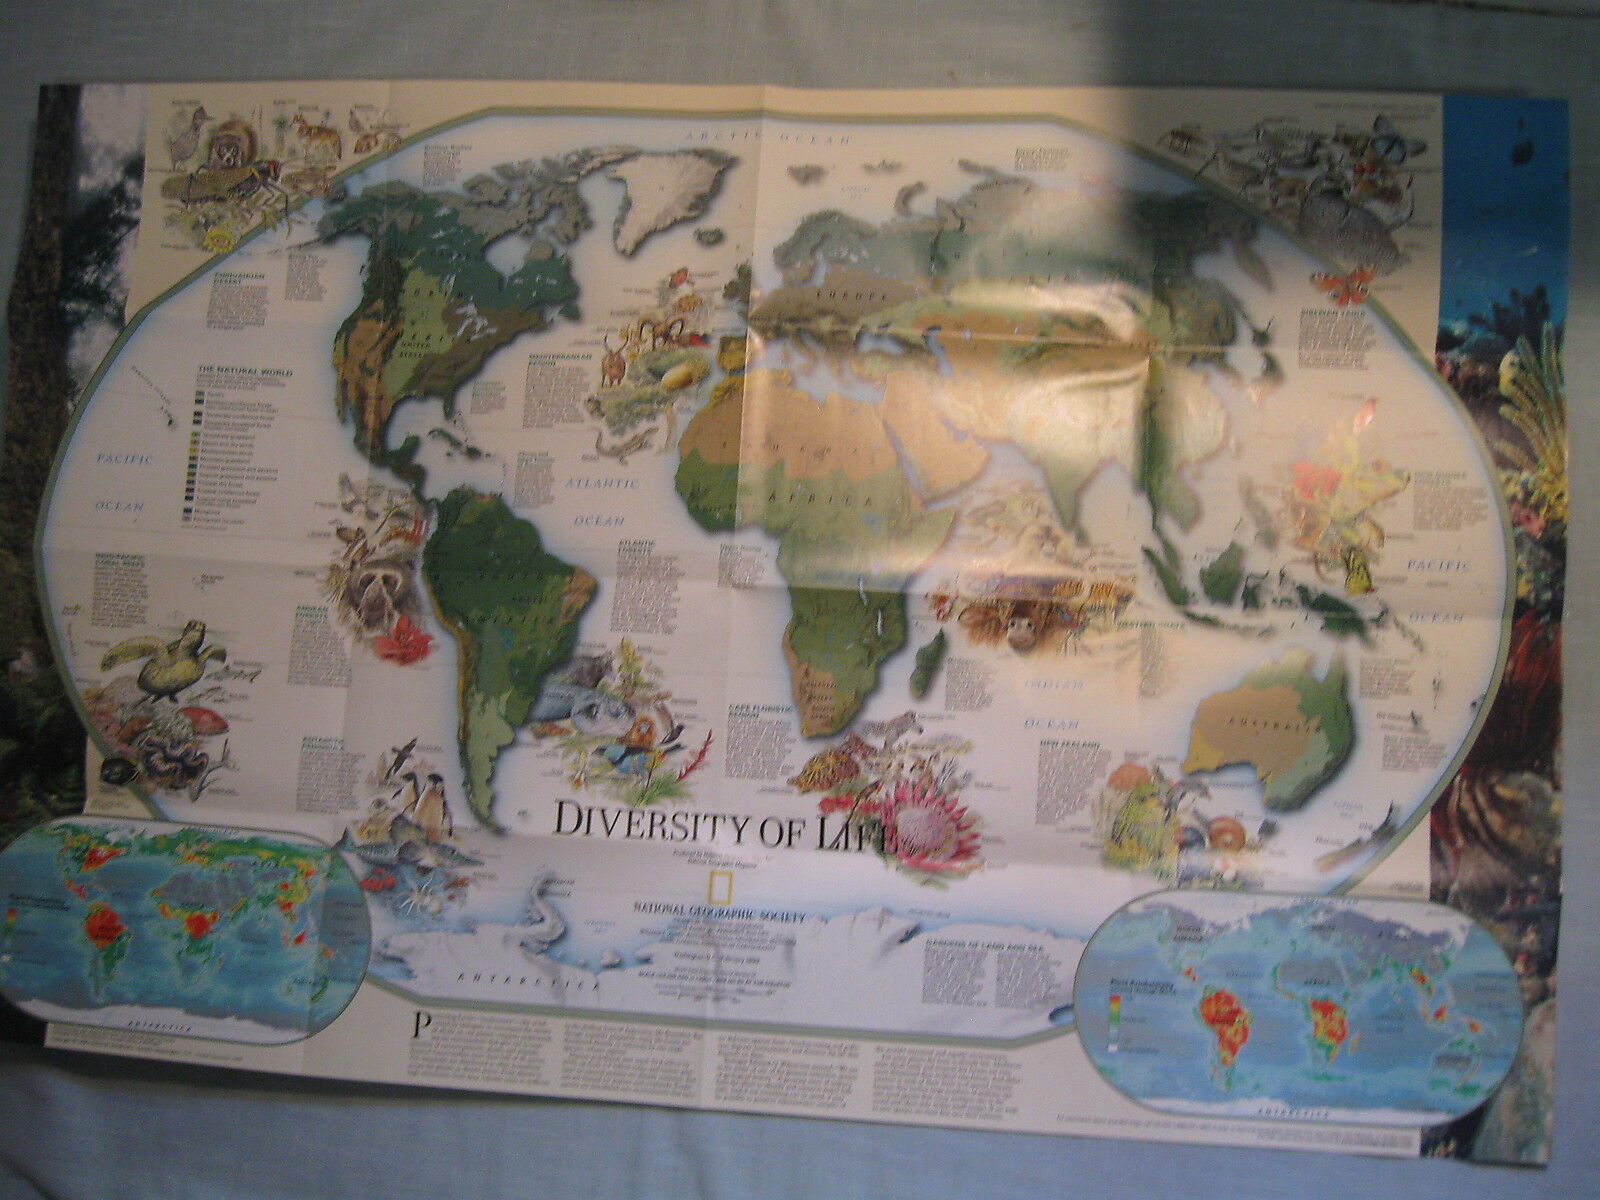 DIVERSITY OF LIFE + BIODIVERSITY WALL MAP National Geographic February 1999